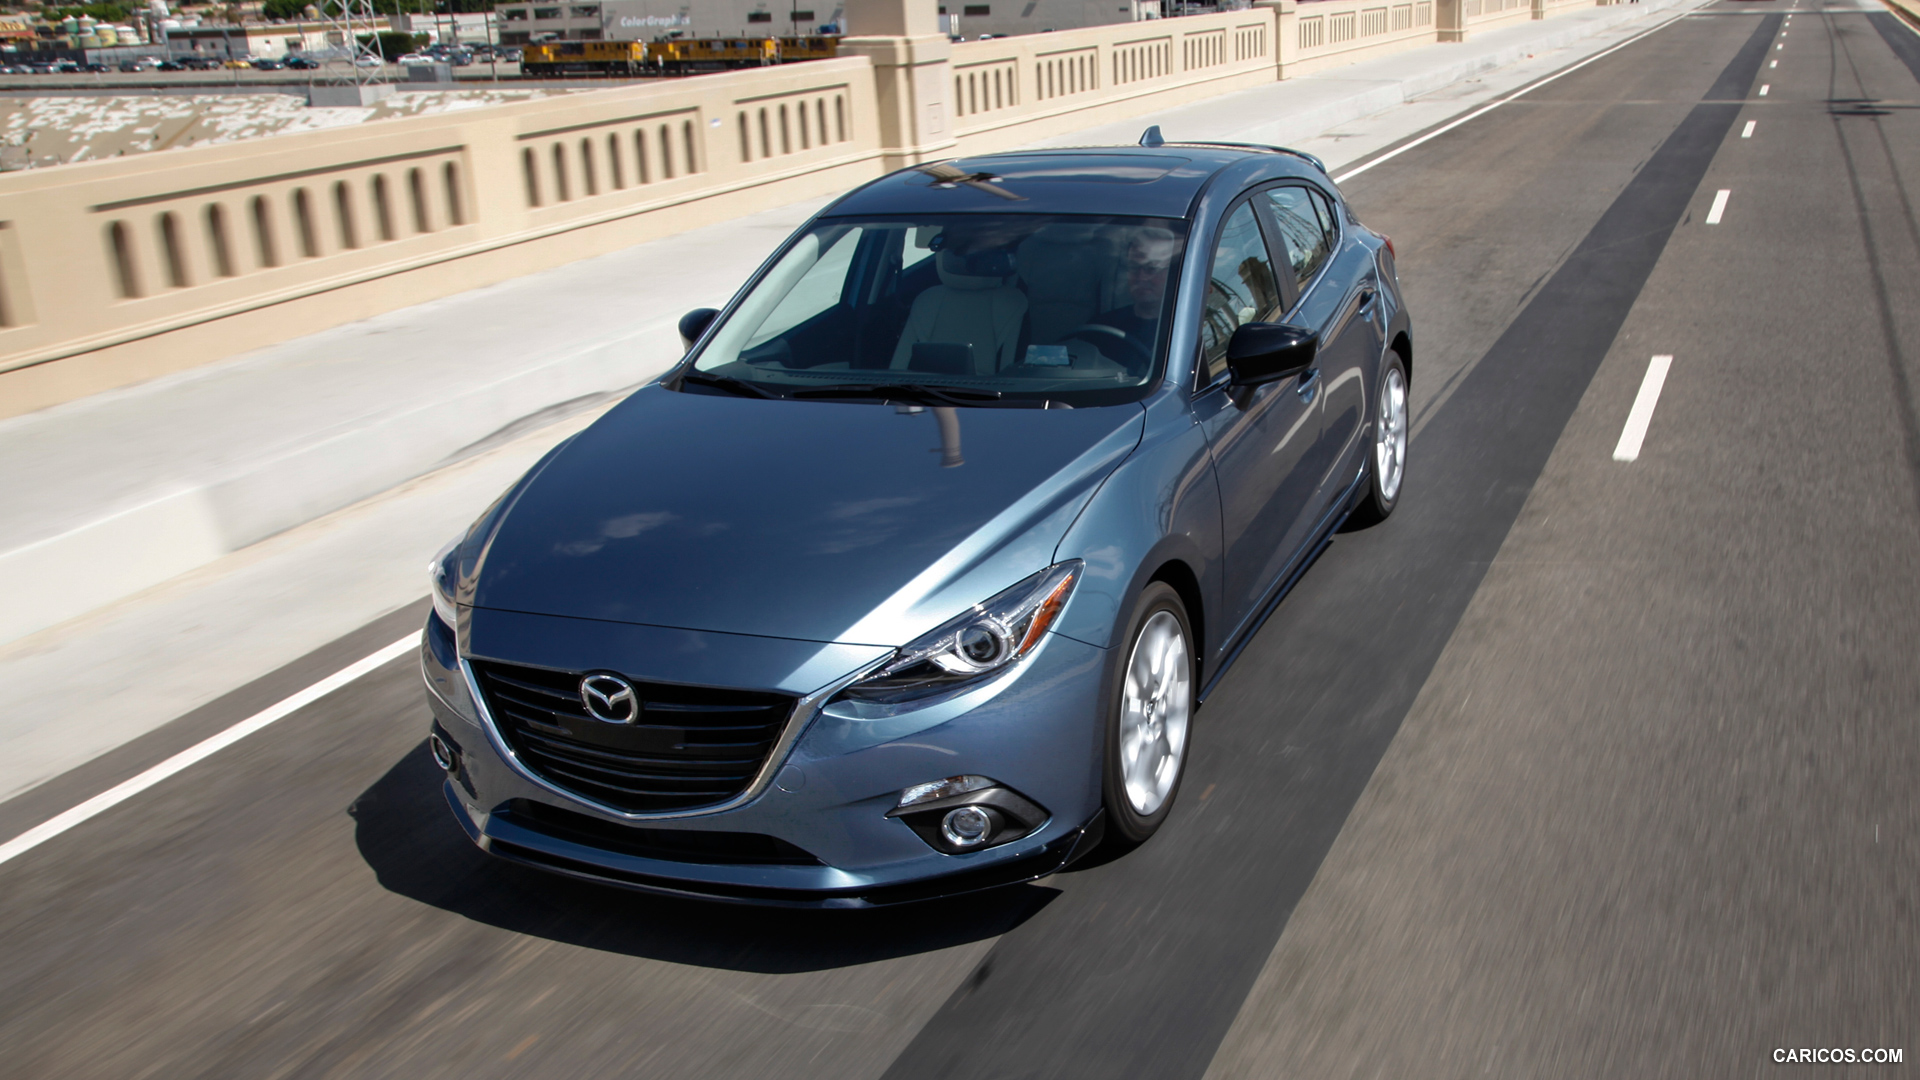 2015 Mazda 3 5D s Touring 6MT (Blue Reflex)  - Front, #13 of 27